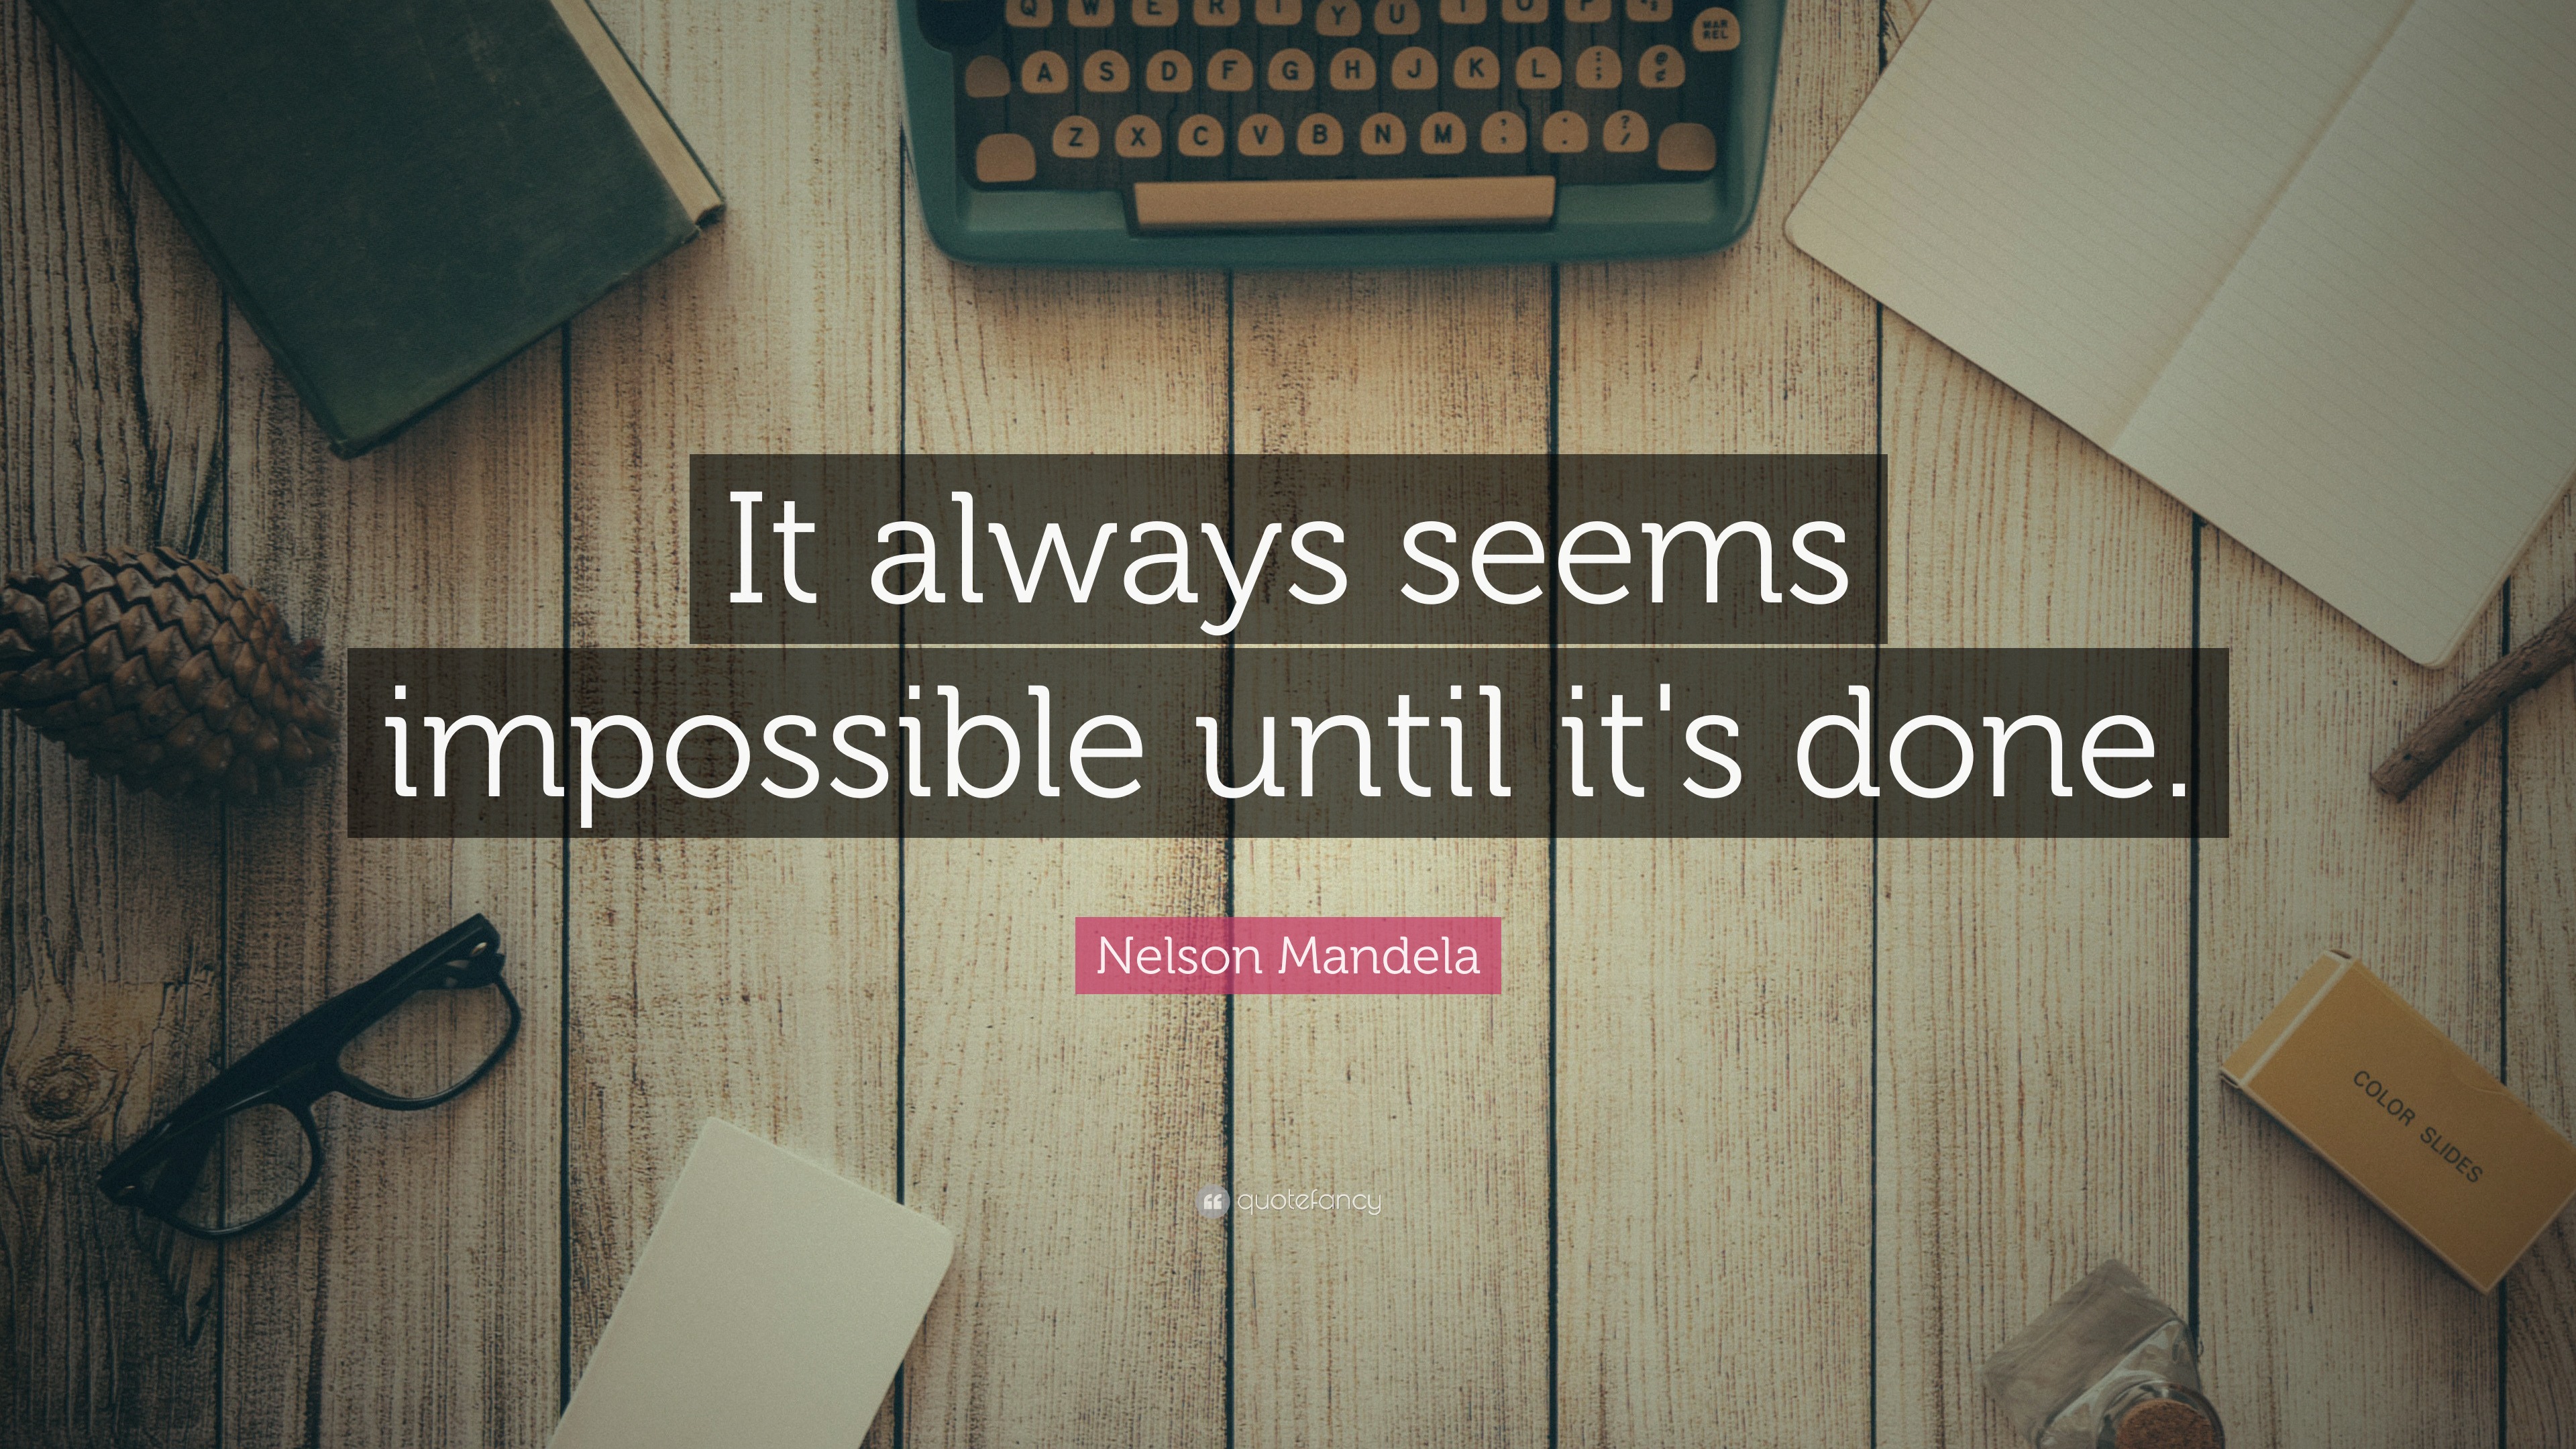 Nelson Mandela Quote: “It always seems impossible until it's done.”